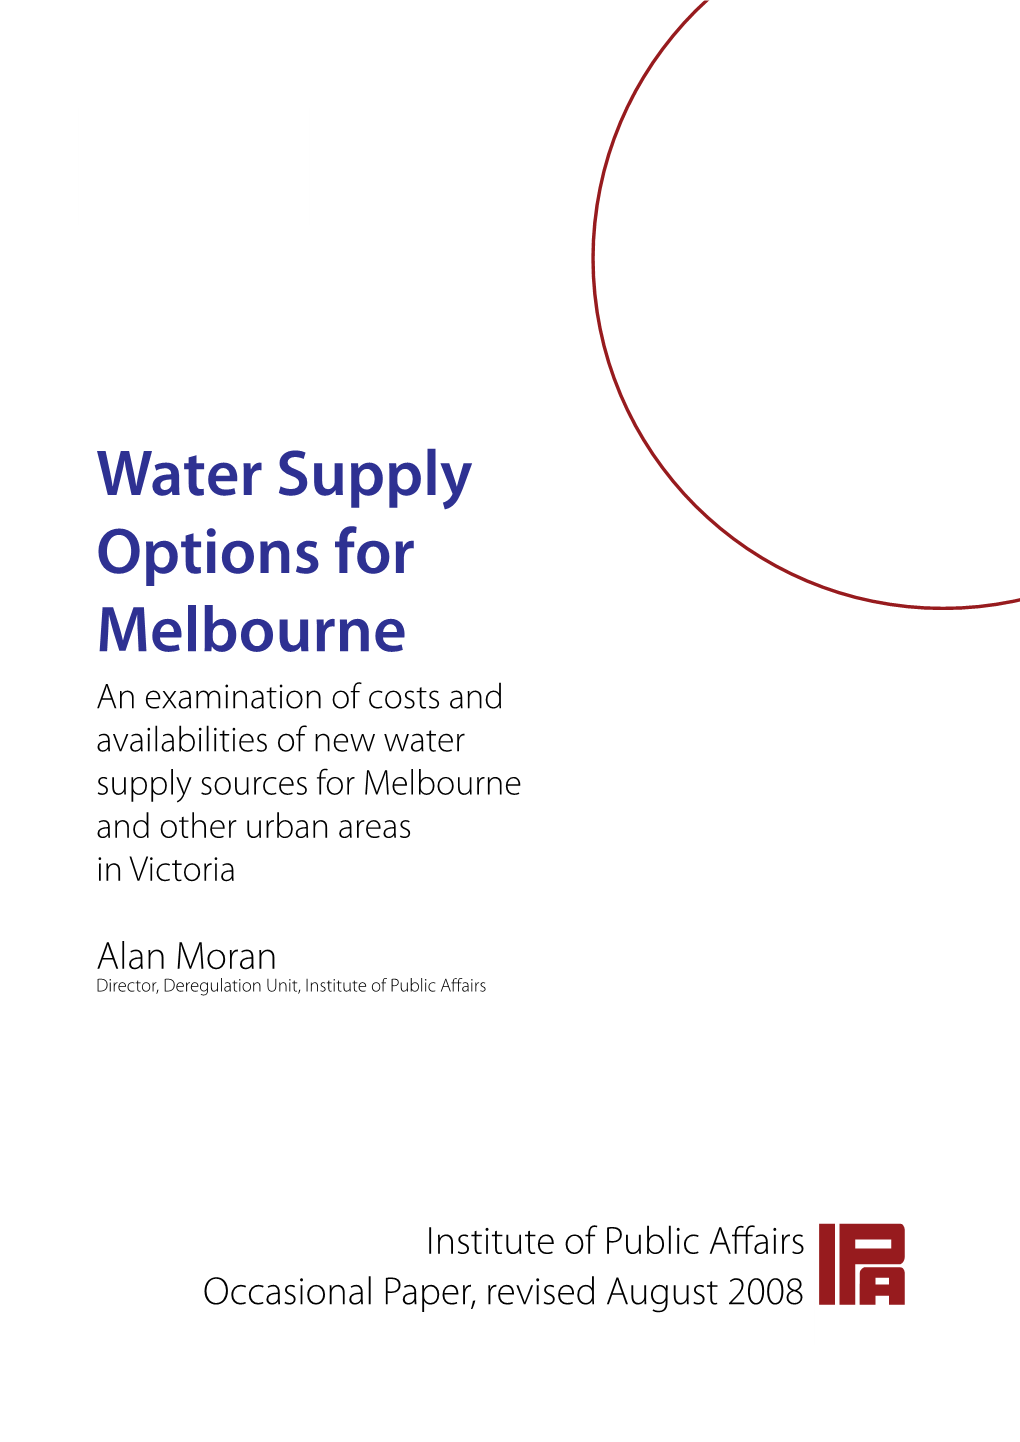 Water Supply Options for Melbourne an Examination of Costs and Availabilities of New Water Supply Sources for Melbourne and Other Urban Areas in Victoria